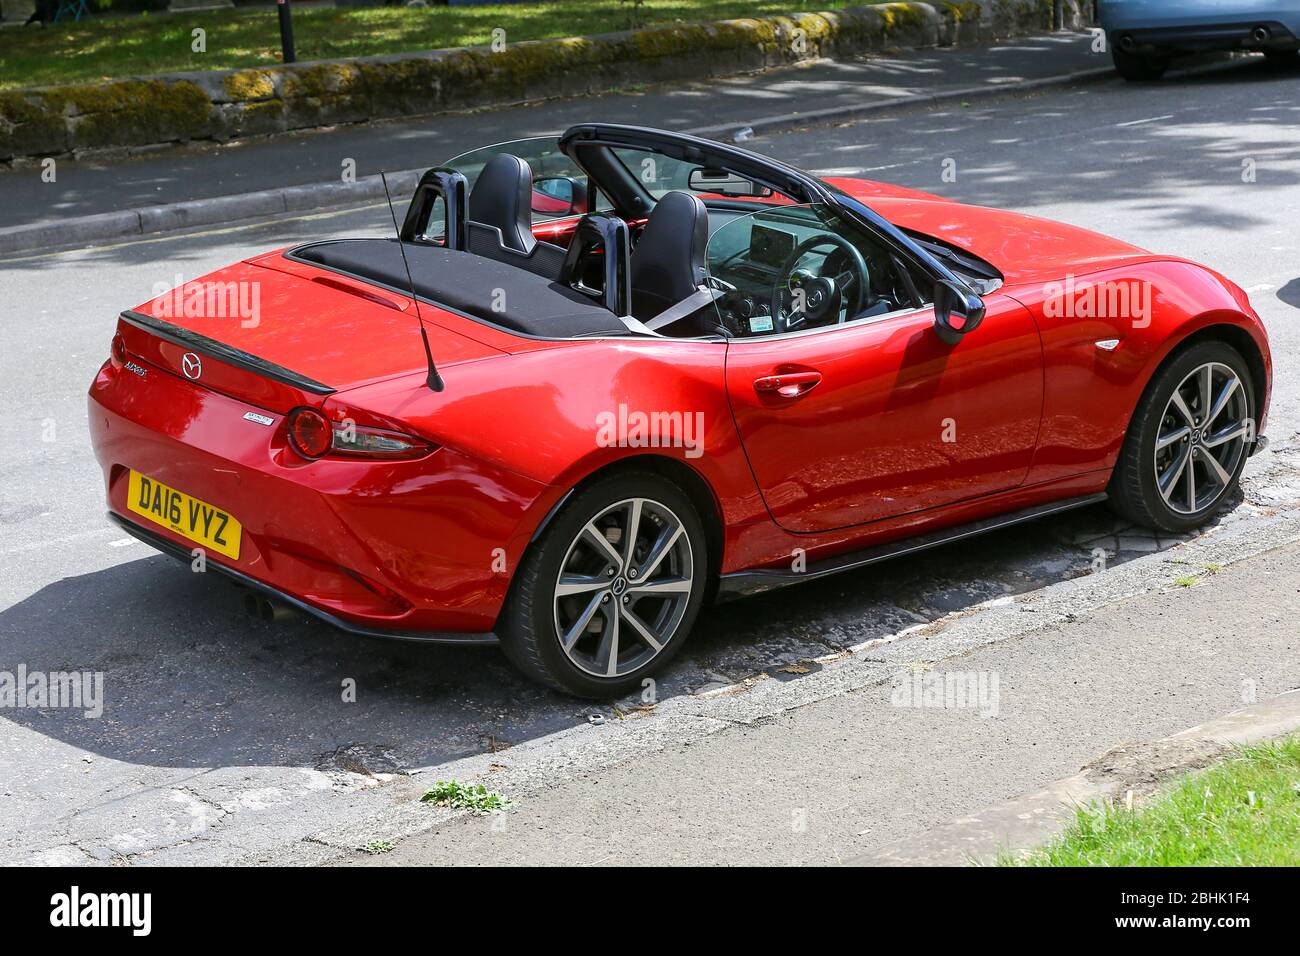 A red Mazda MX-5 soft top or convertible sports car, England, UK Stock Photo